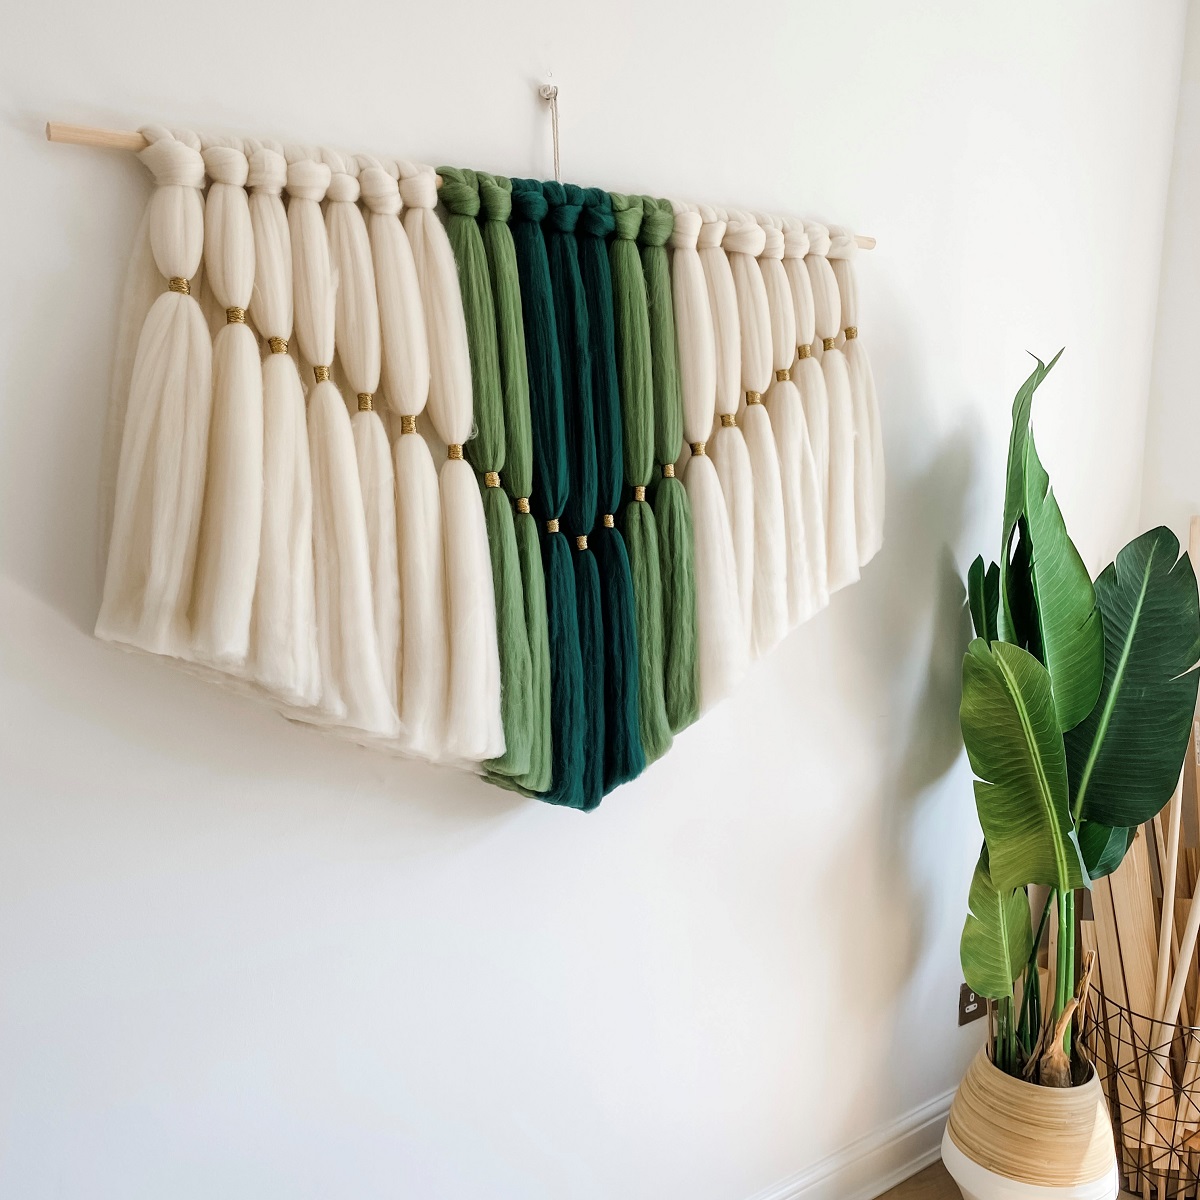 hand made macramé wall hanging in green and white by Knot My Name